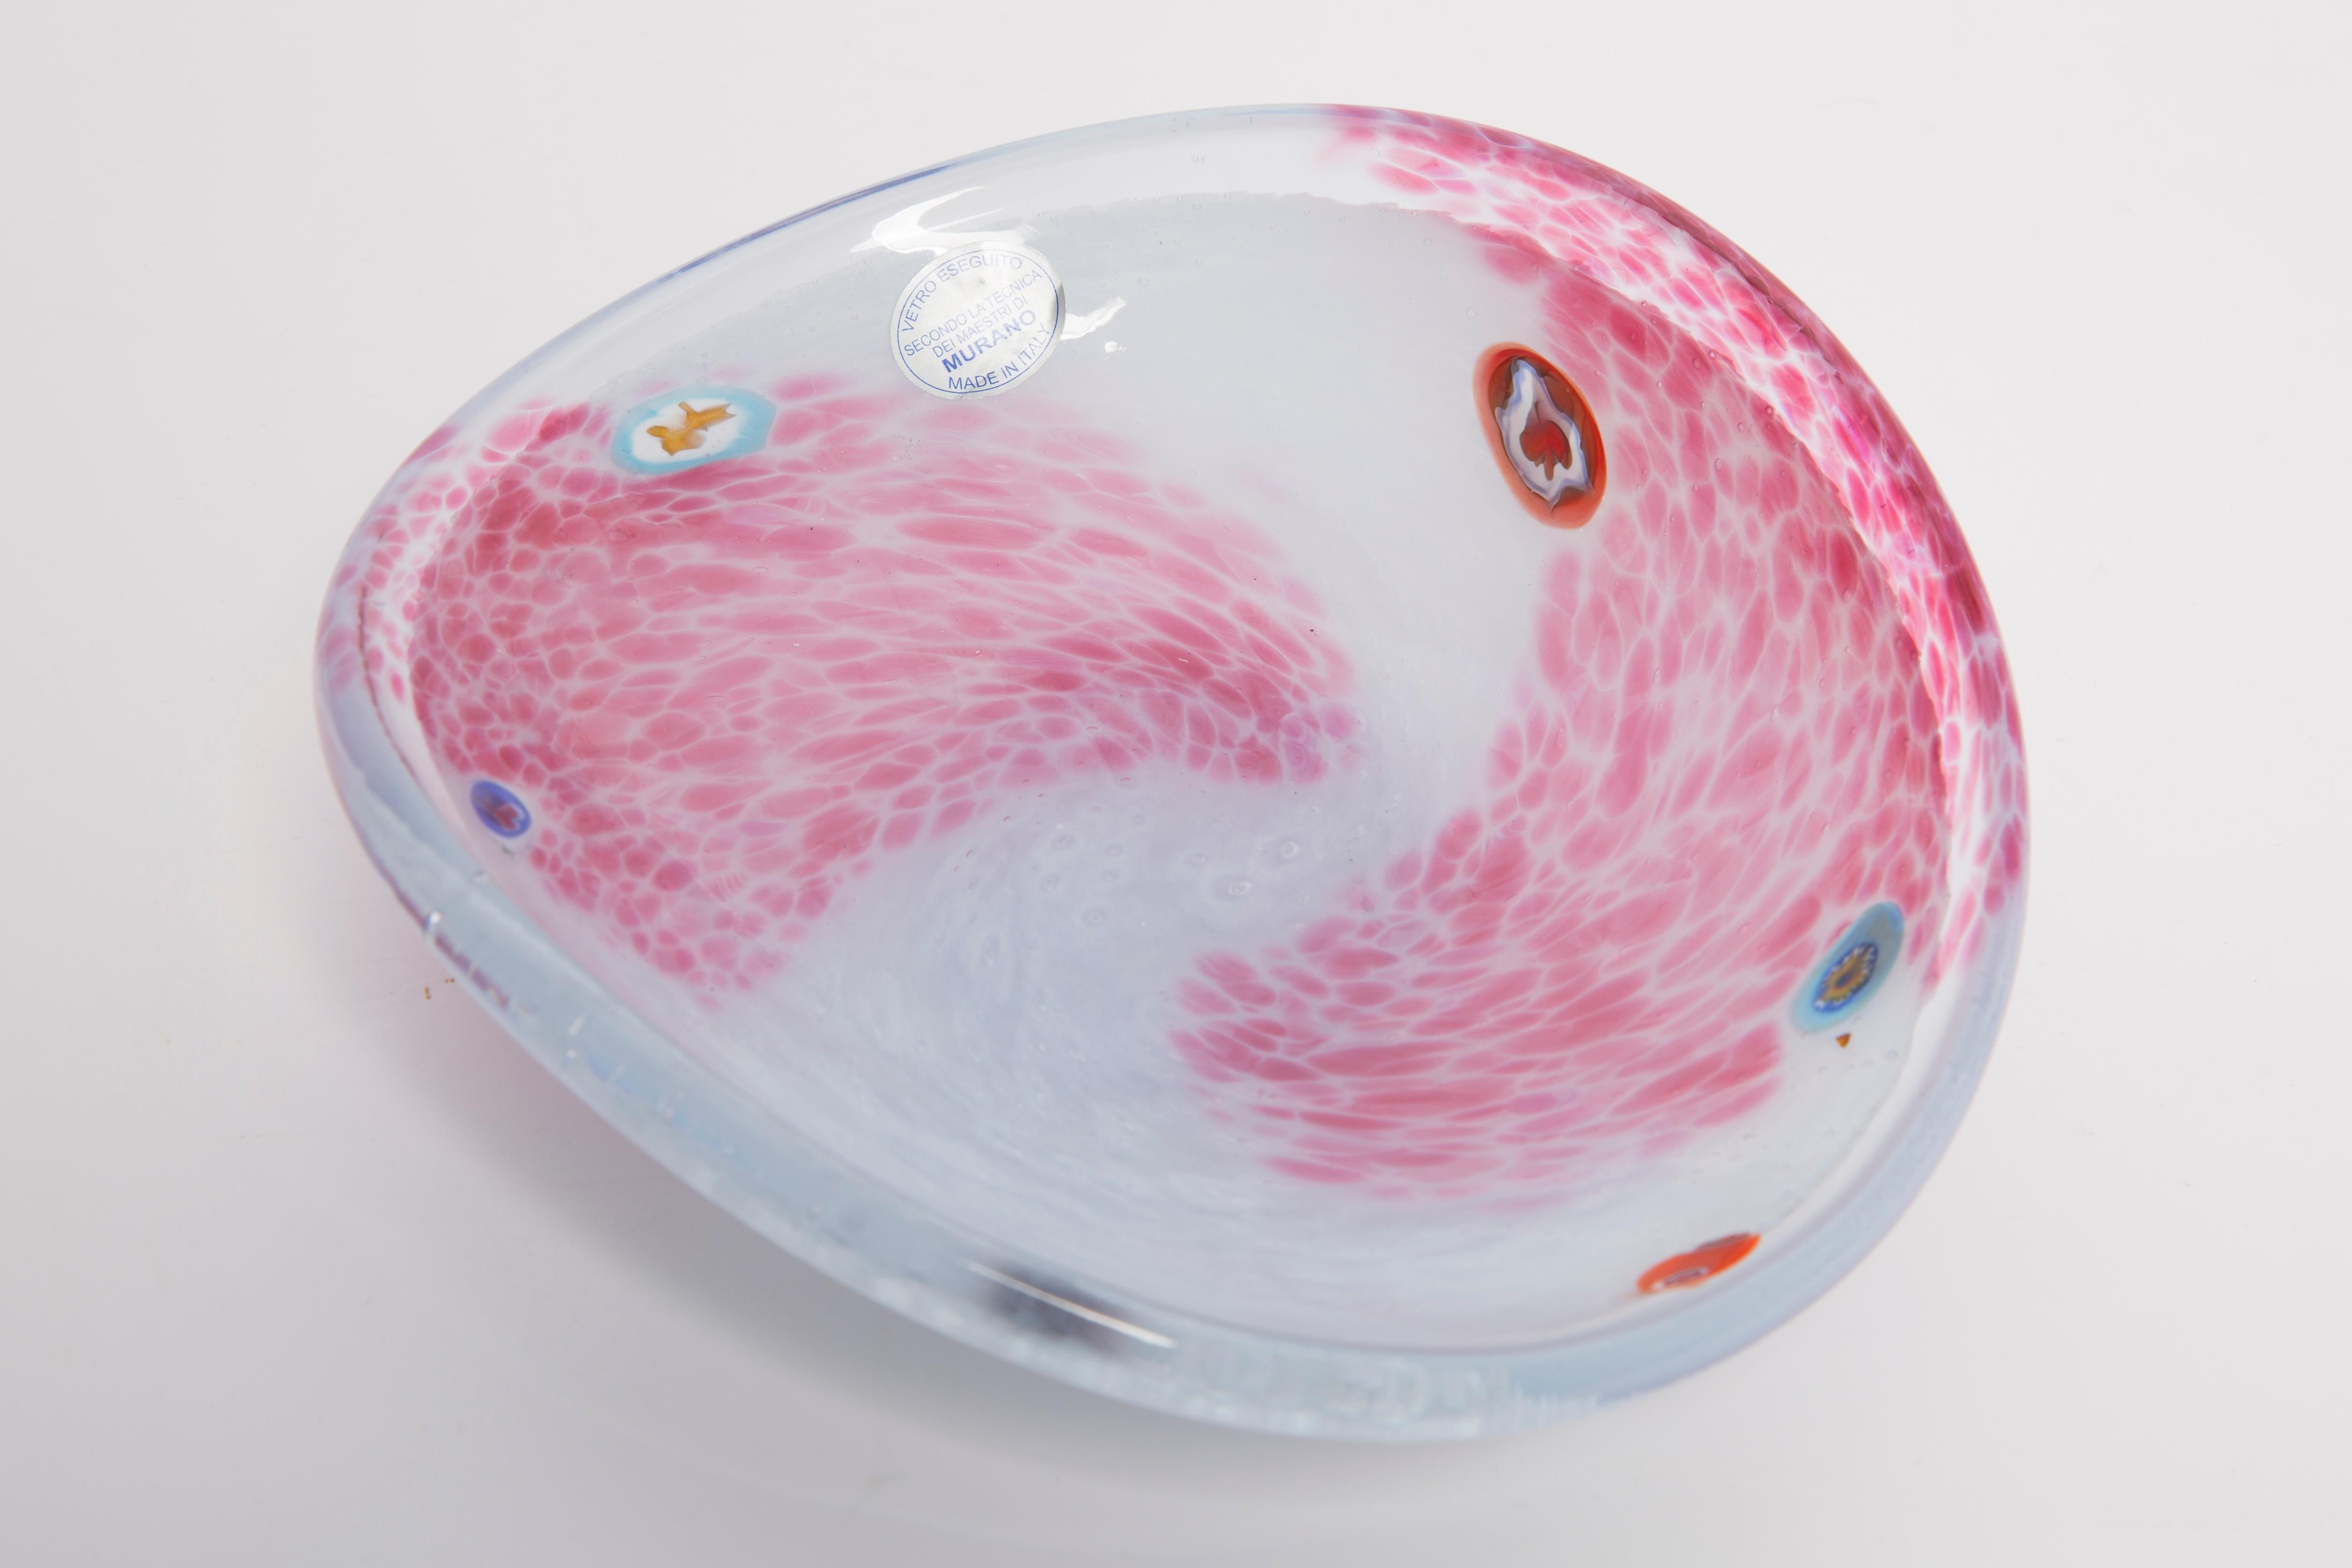 Ceramic Vintage White and Pink Decorative Murano Glass Plate, Italy, 1960s